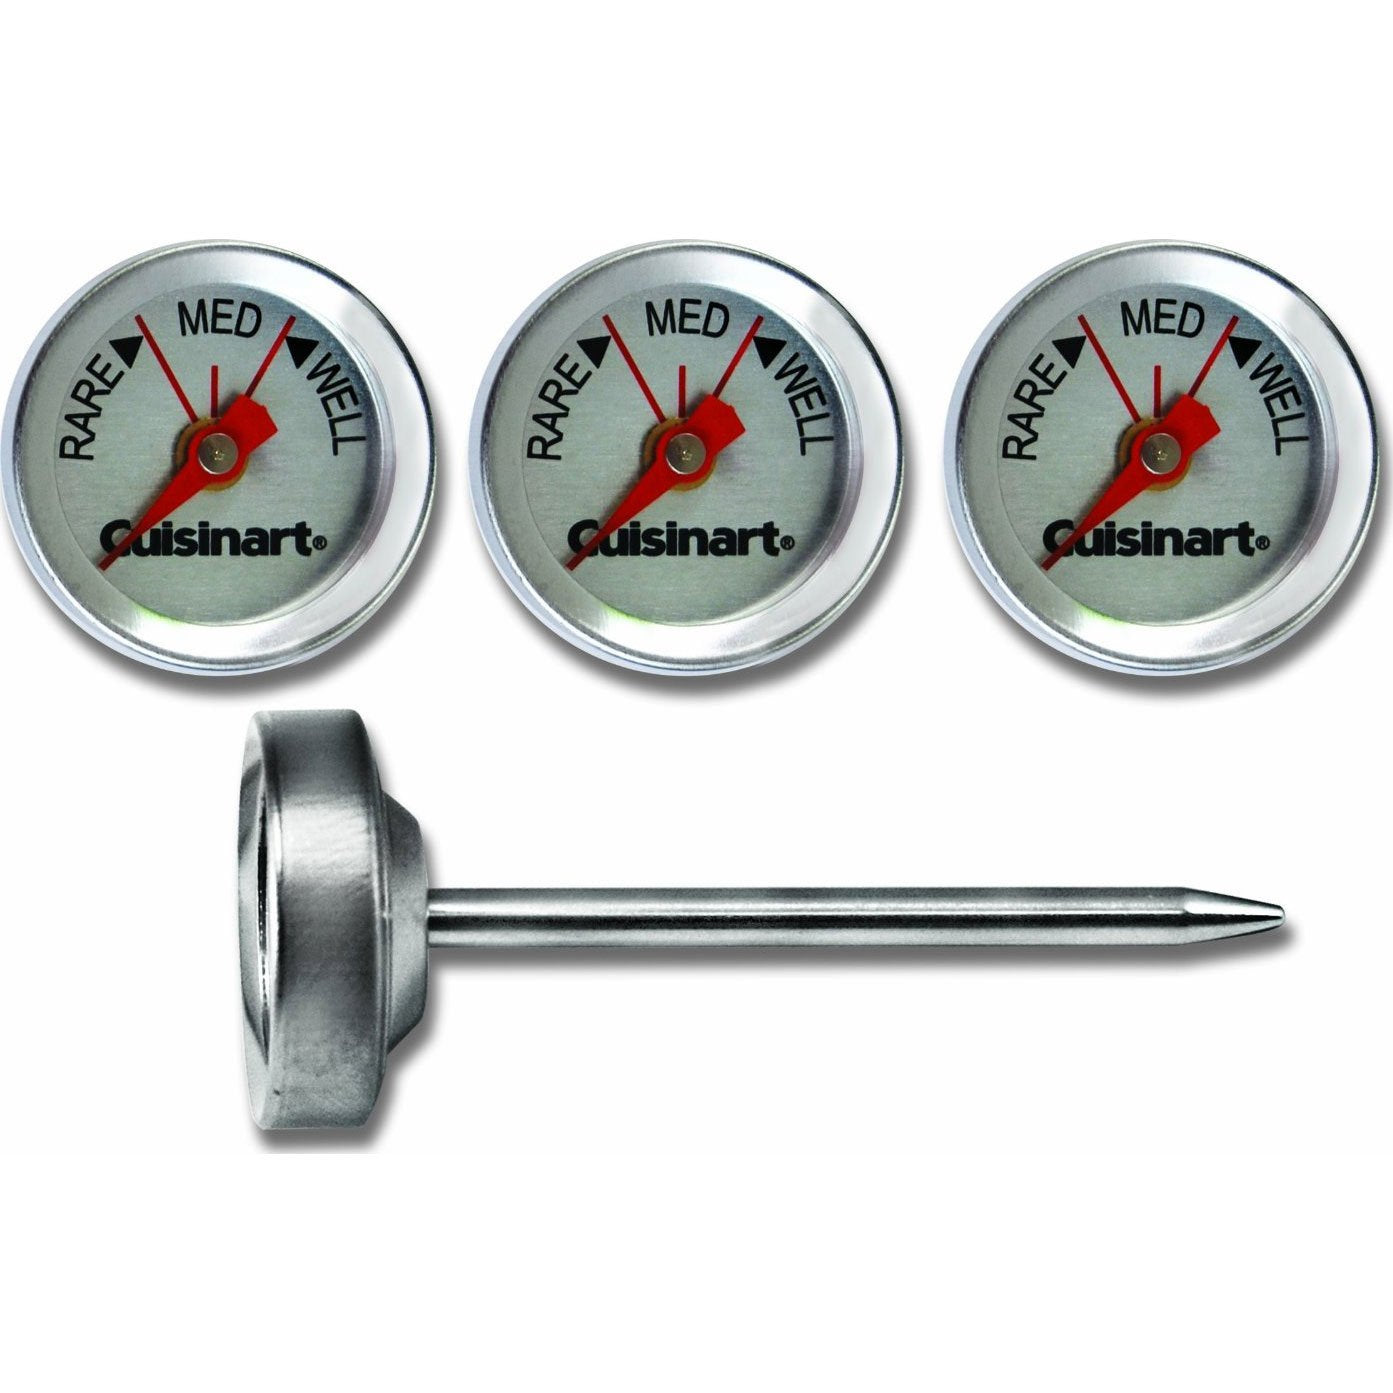 Cuisinart CSG-603 Outdoor Grilling Steak Thermometers (Set of 4)